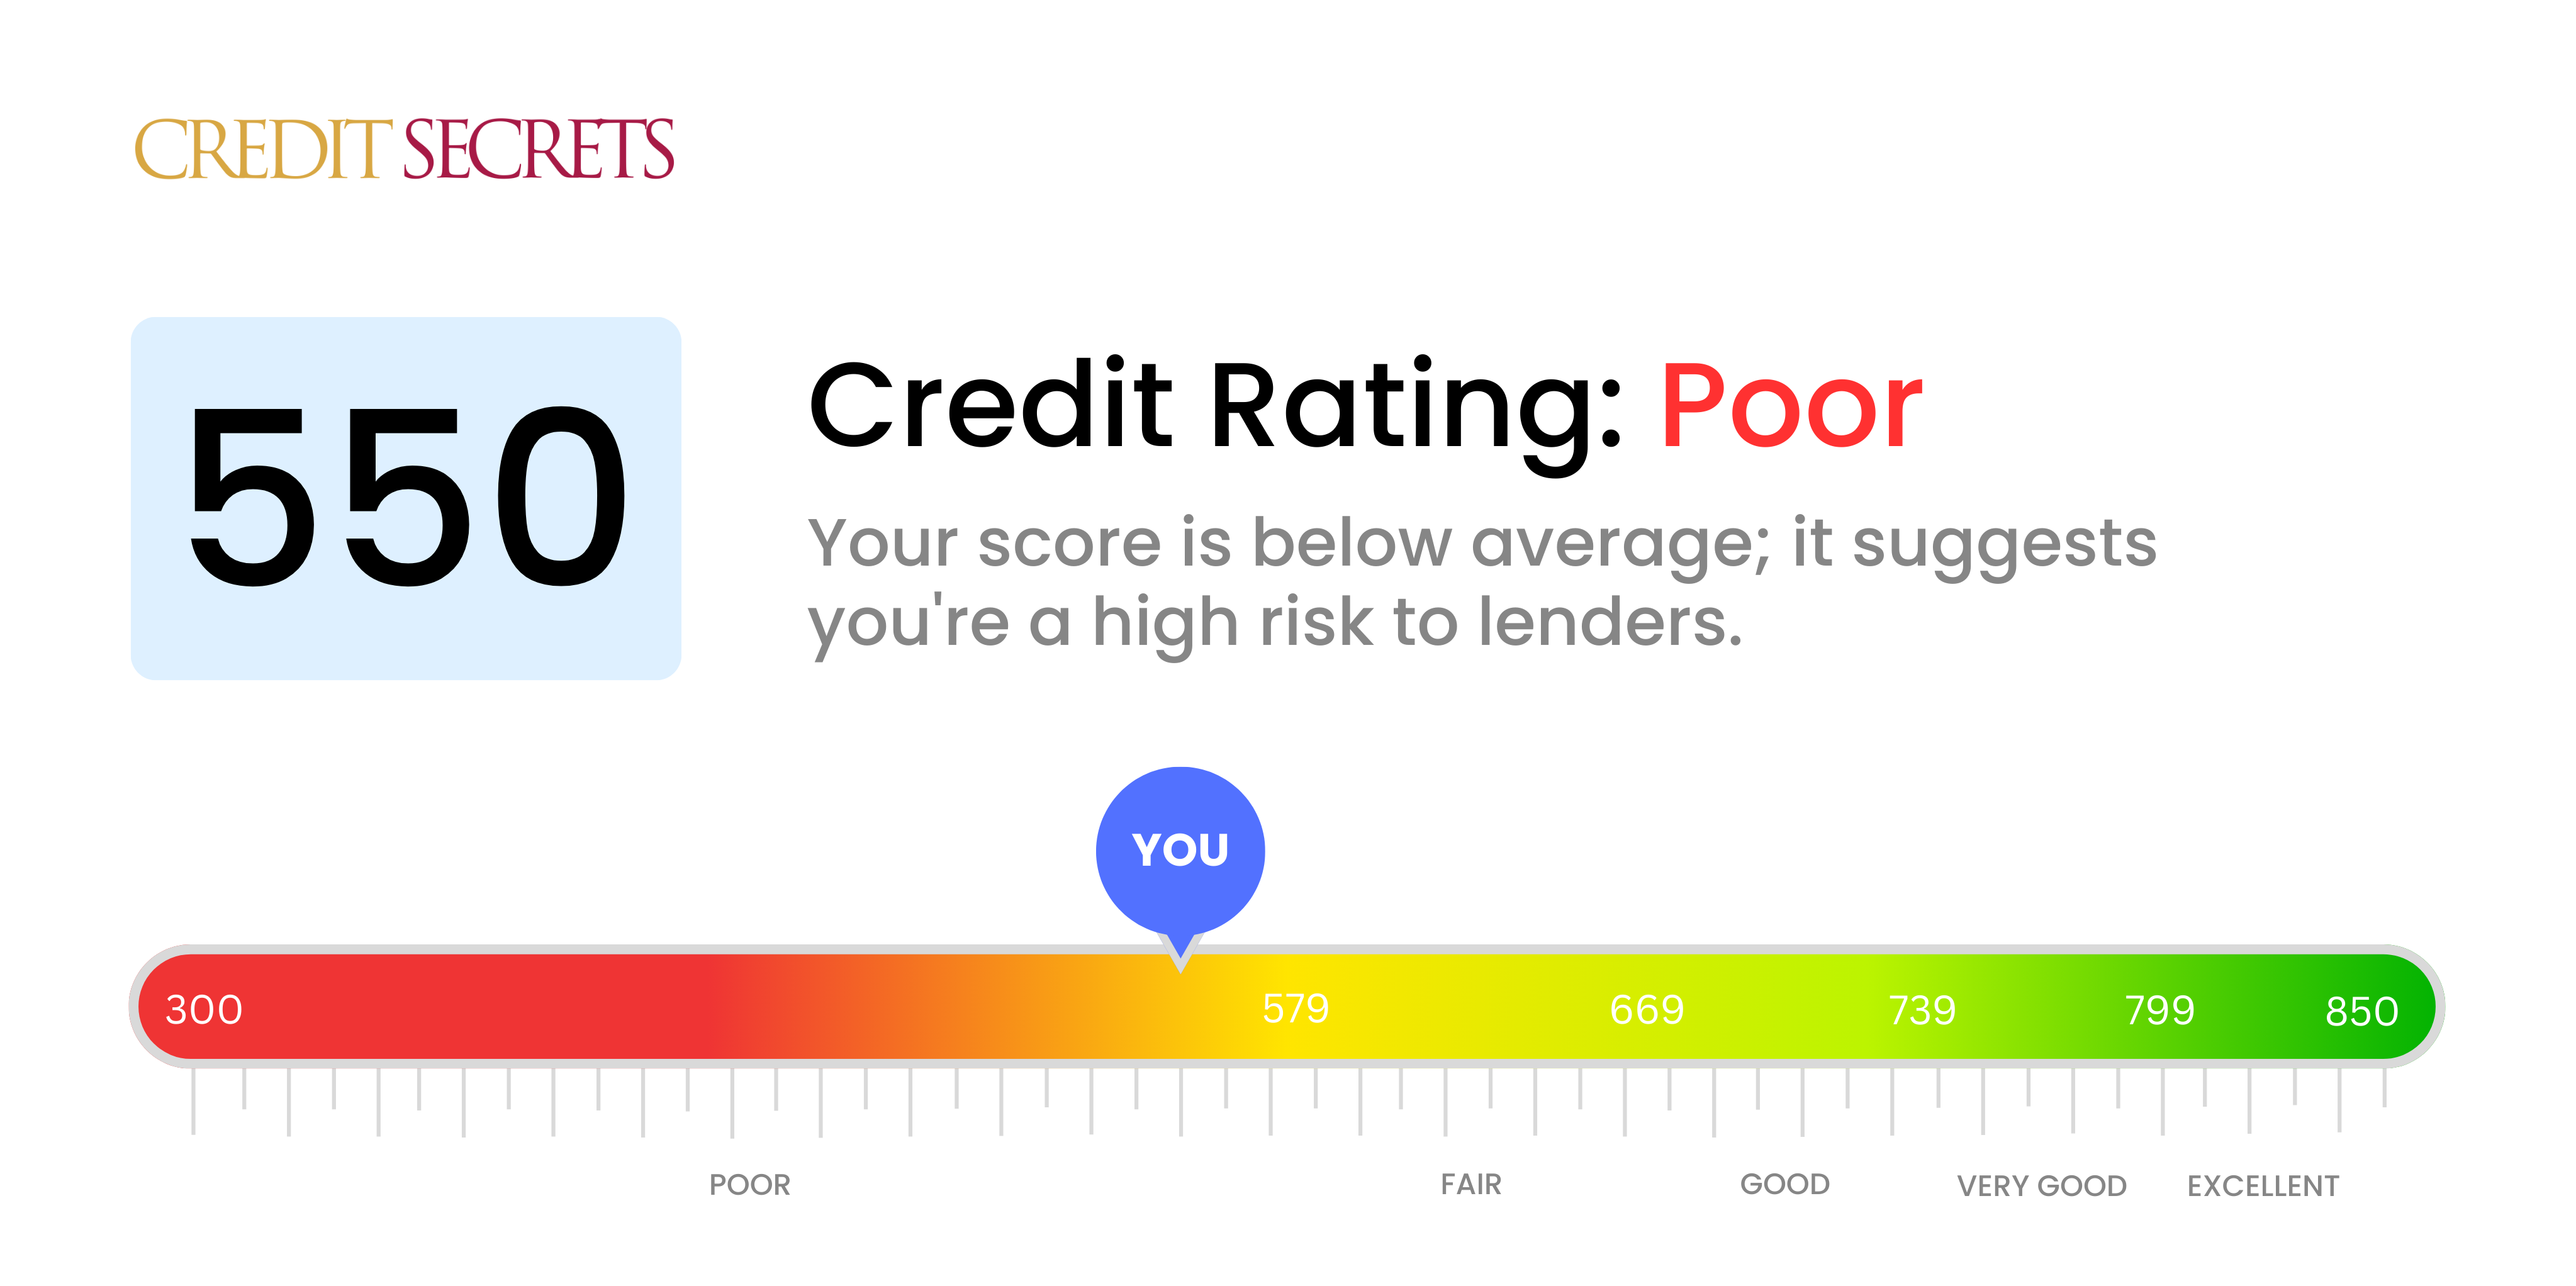 Is 550 a good credit score?